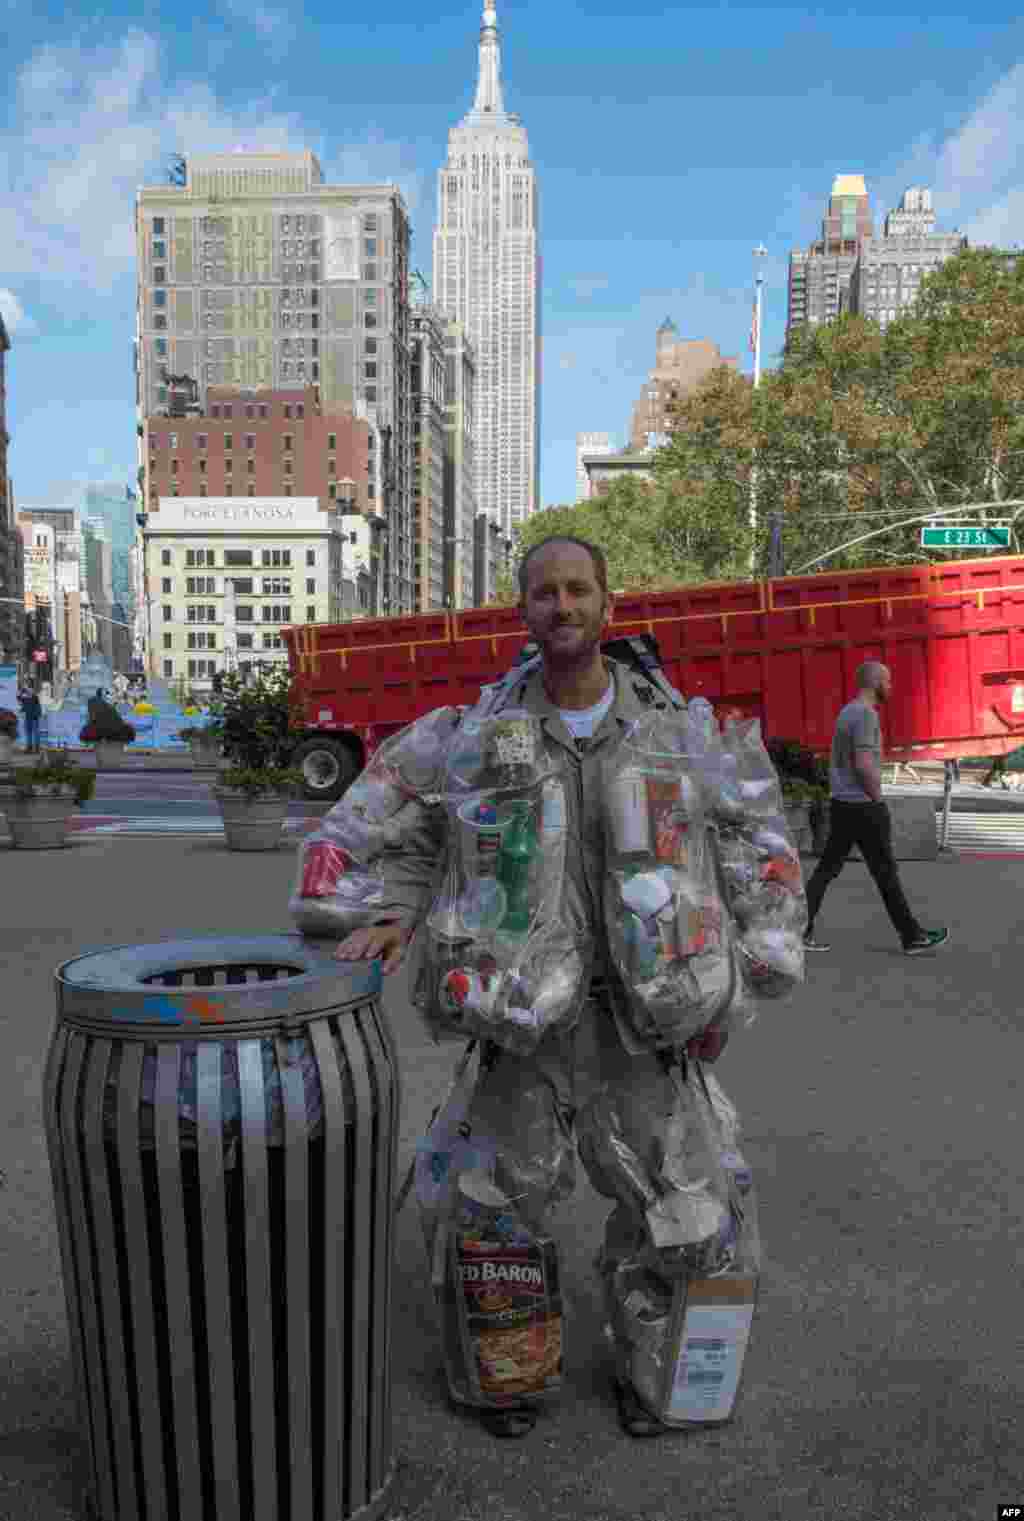 Rob Greenfield, an environmental activist who is spending a month in New York, has hanging on himself in ziplog bags all the trash he has produced, Oct. 4, 2016.